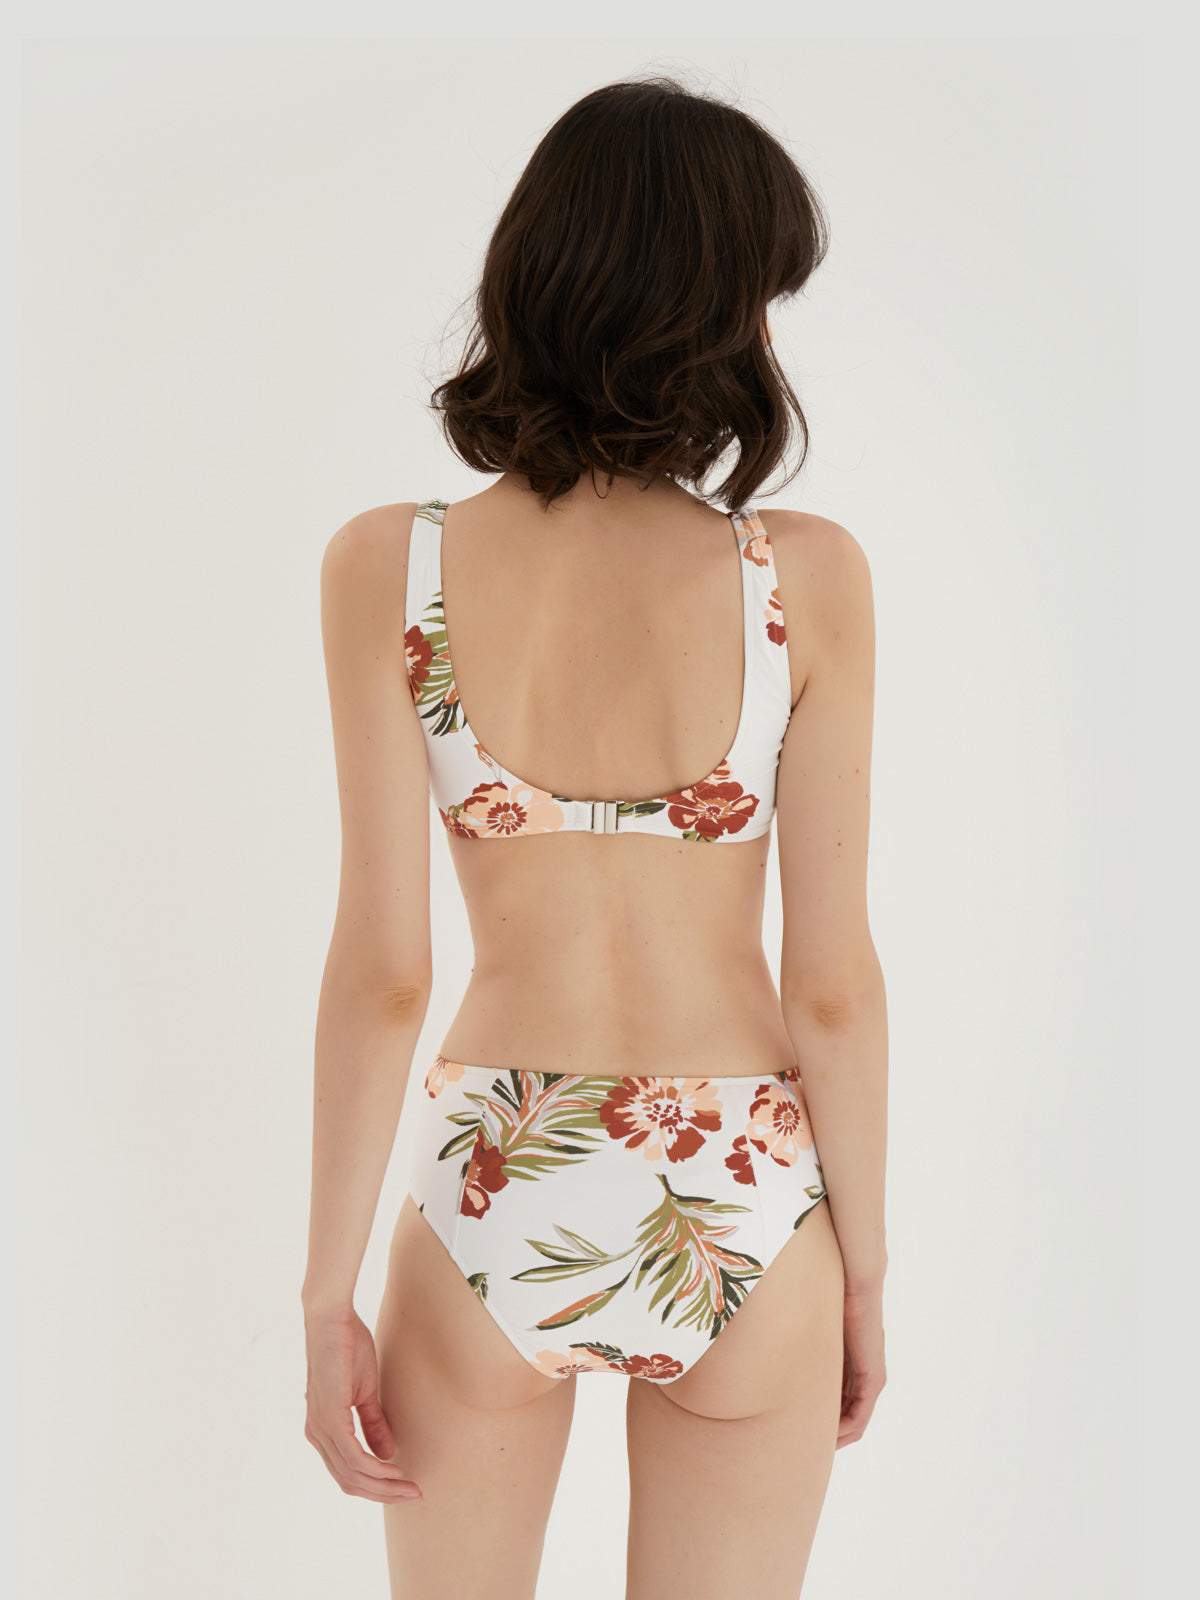 charming-front-clasp-floral-two-piece-bikini_all_floral_3.jpg